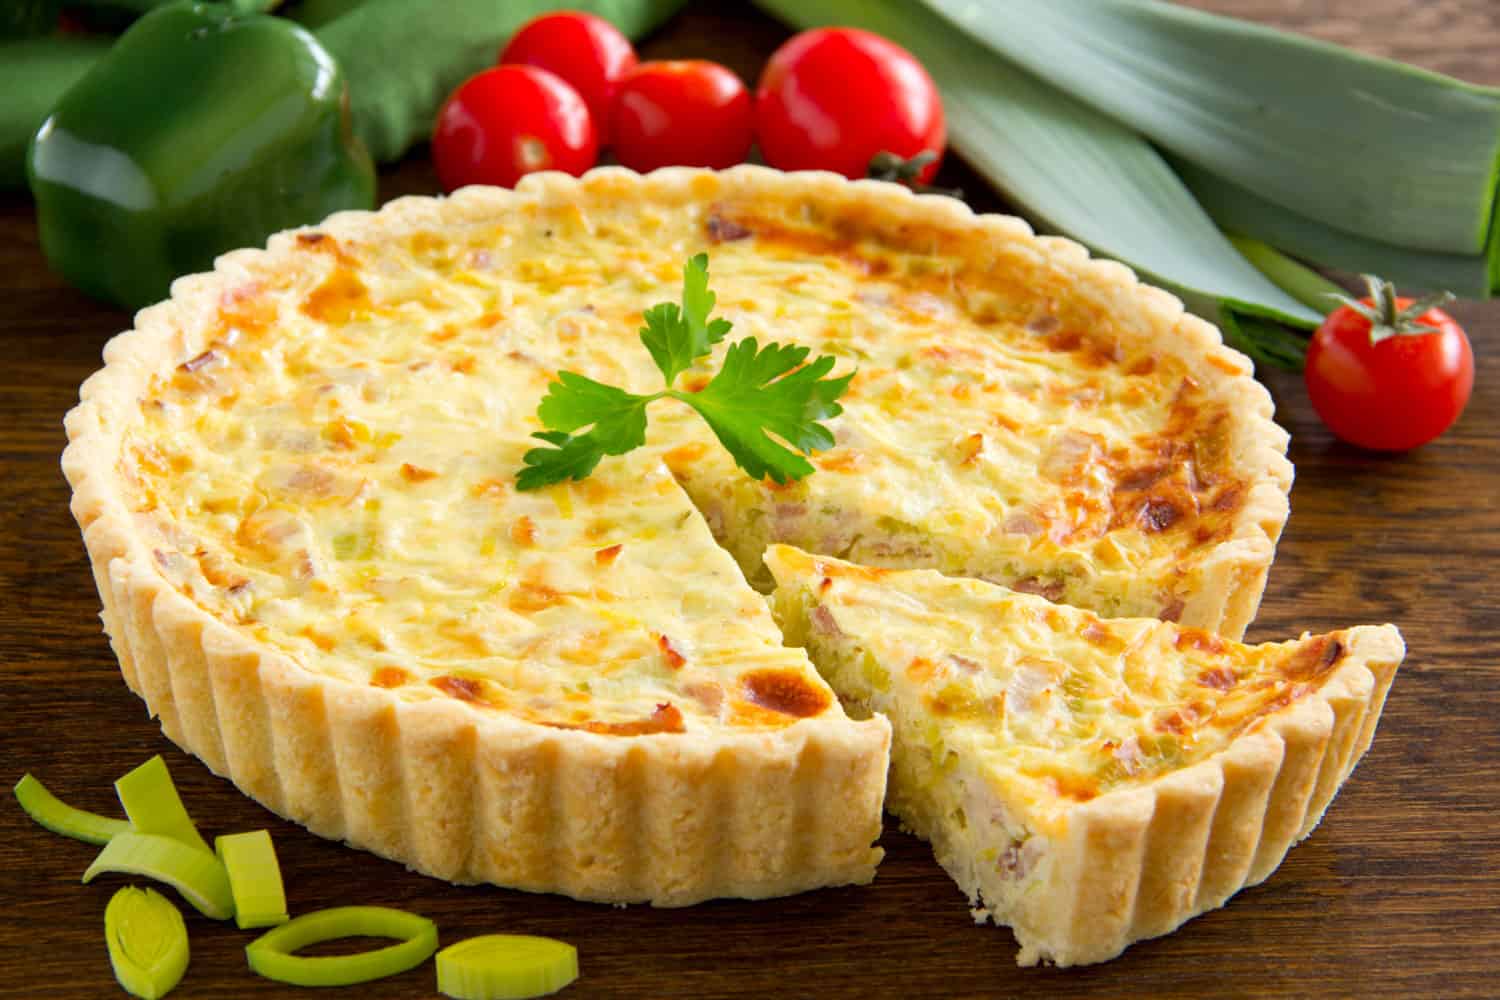 Quiche Not Setting - What To Do? - Kitchen Seer